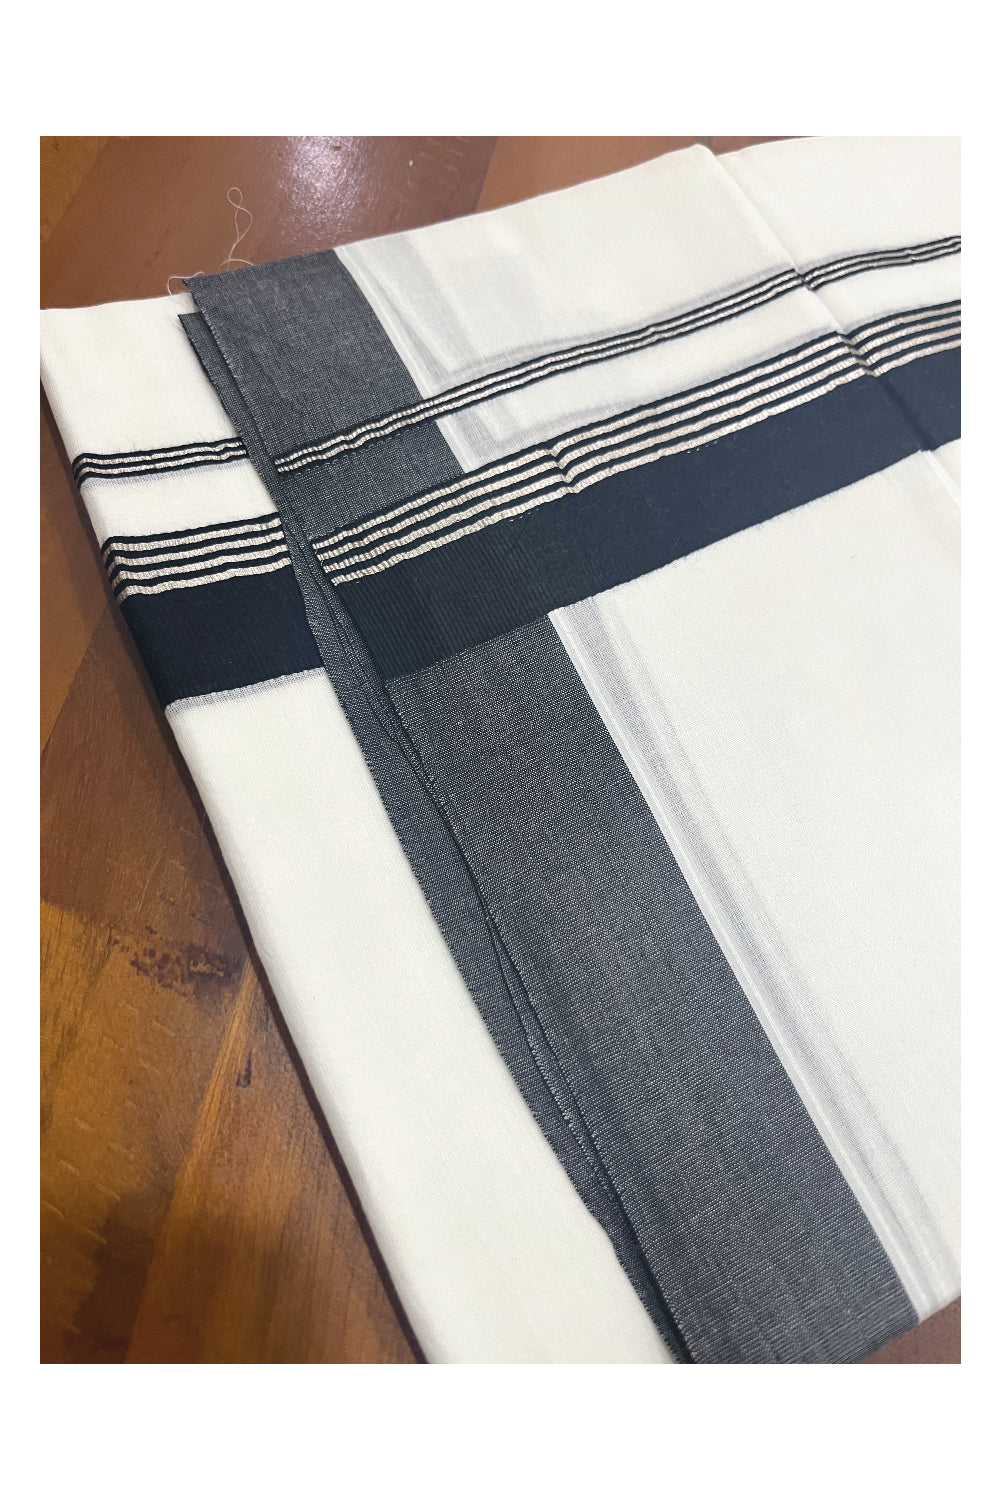 Pure White Cotton Double Mundu with Black and Silver Kasavu Border (South Indian Dhoti)